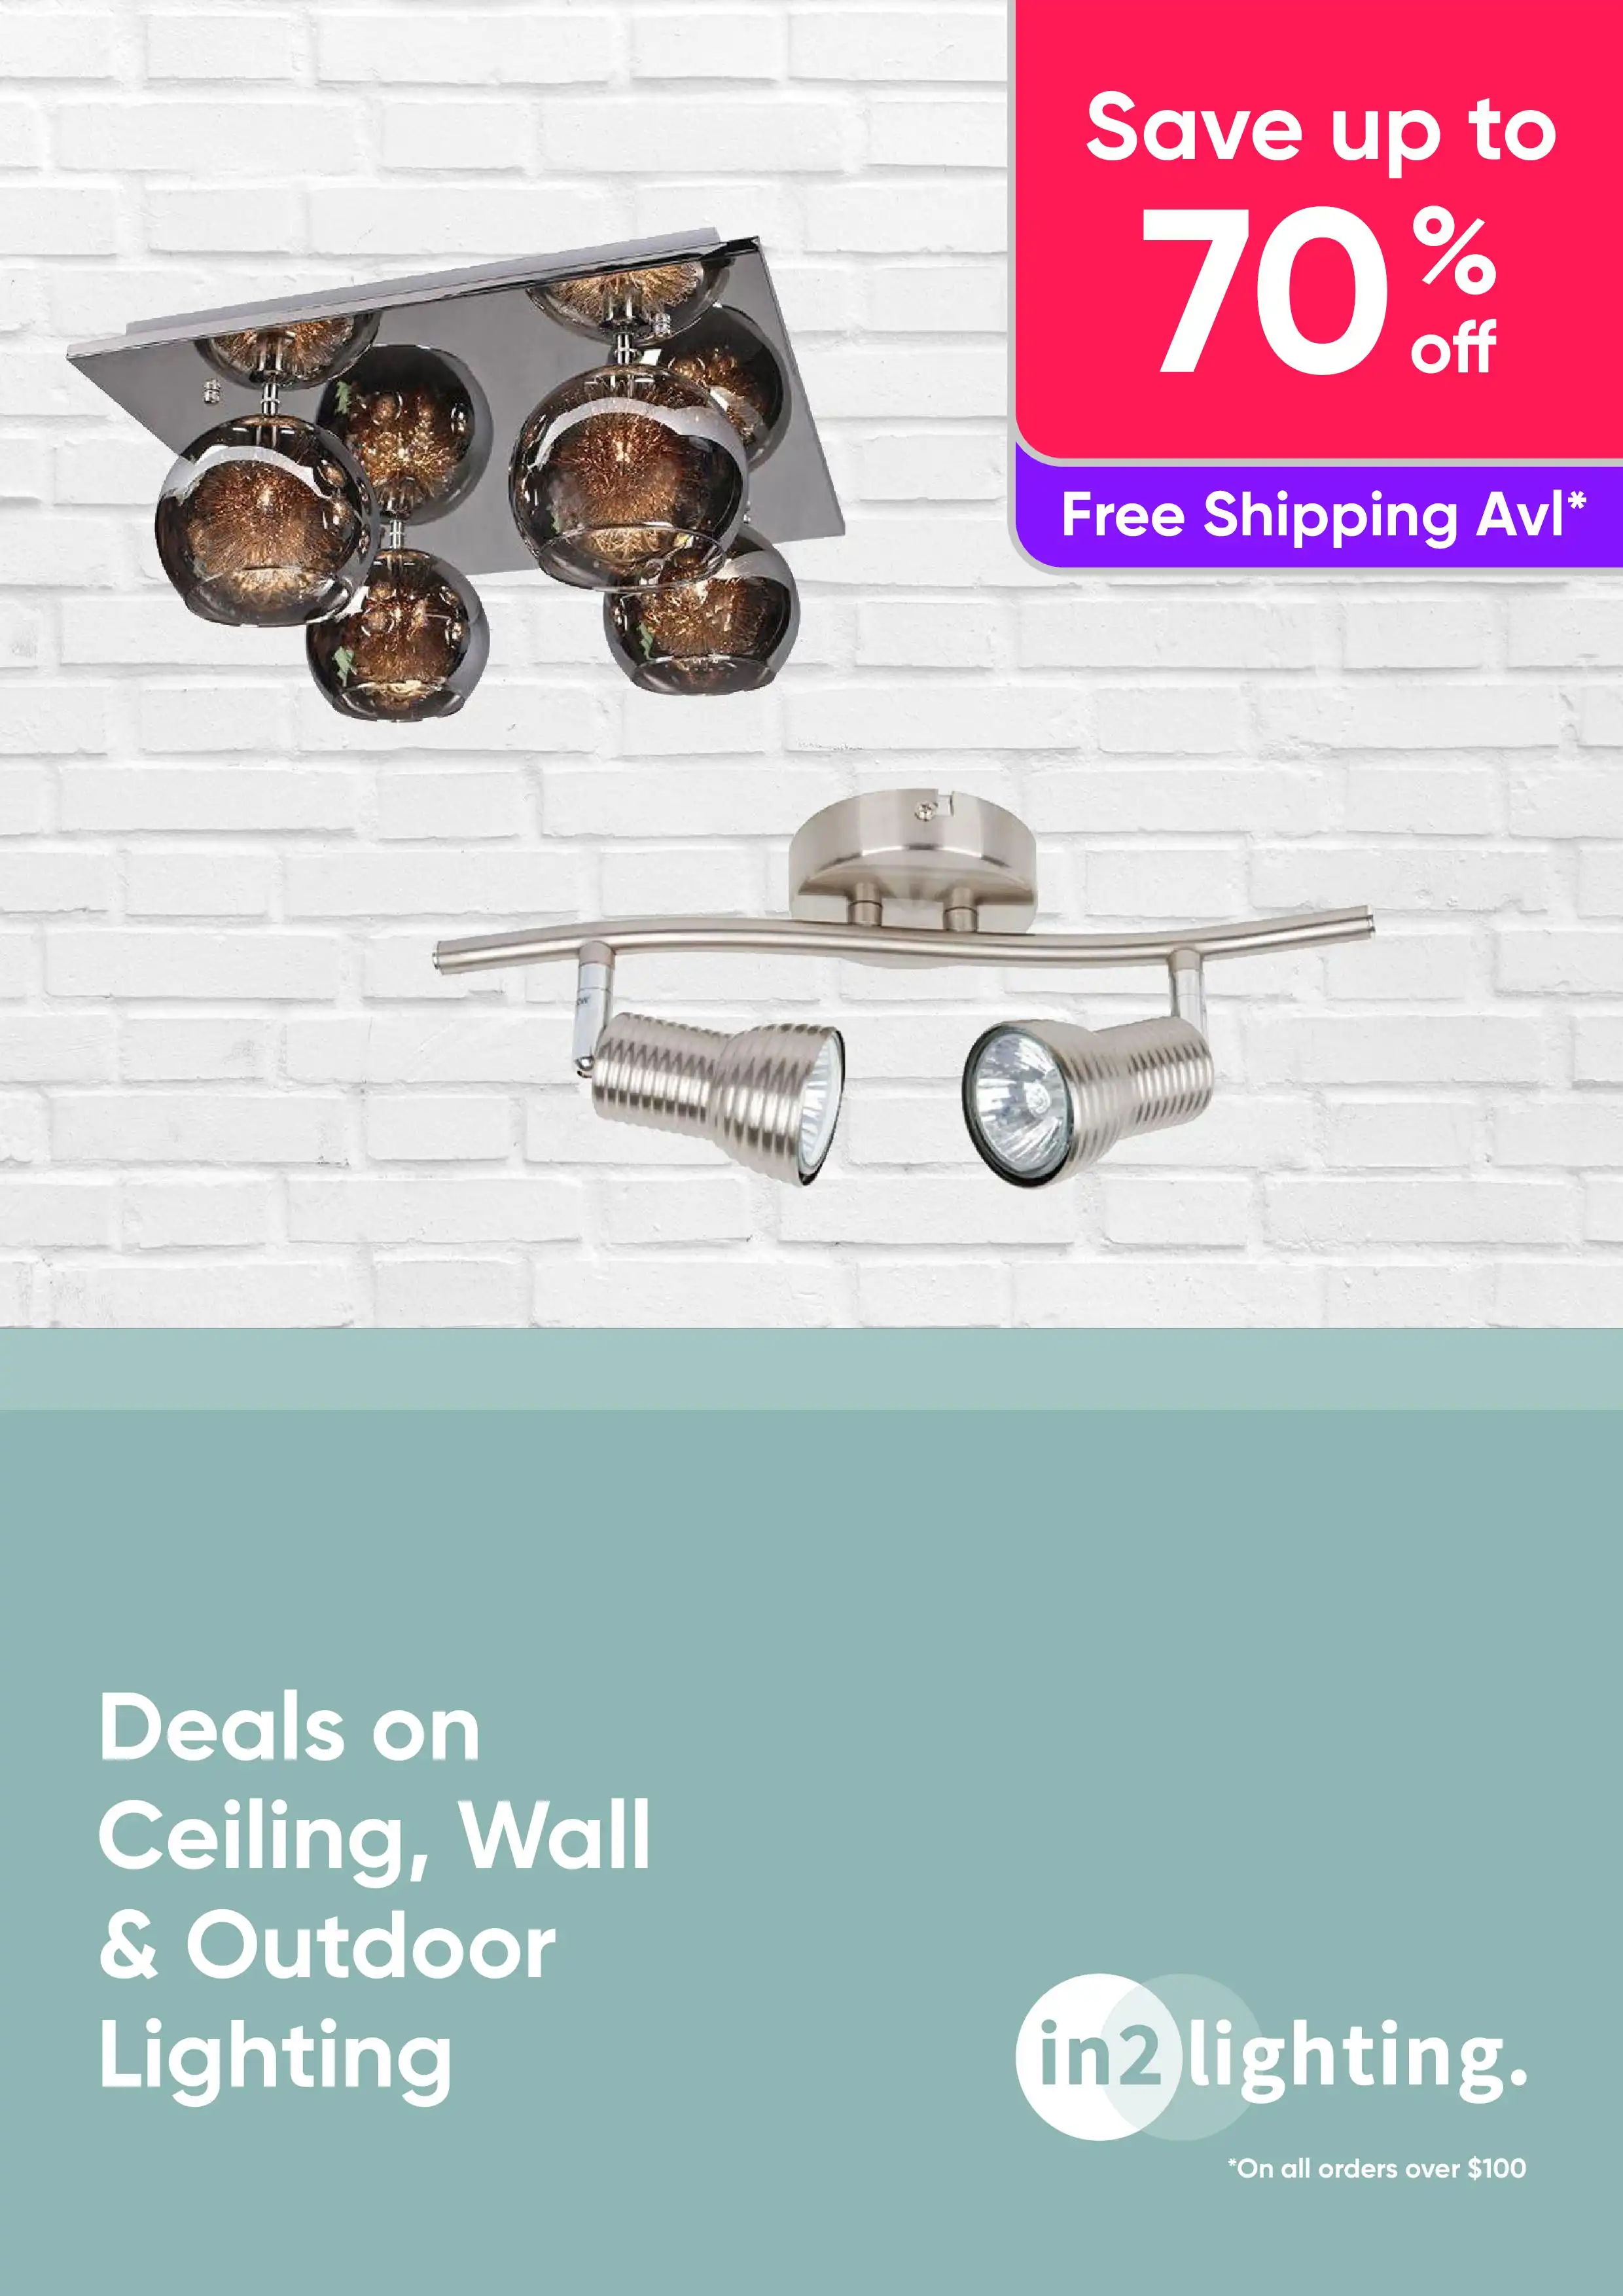 Lighting Deals Save Up To 70% on Ceiling, Wall and Outdoor Lighting